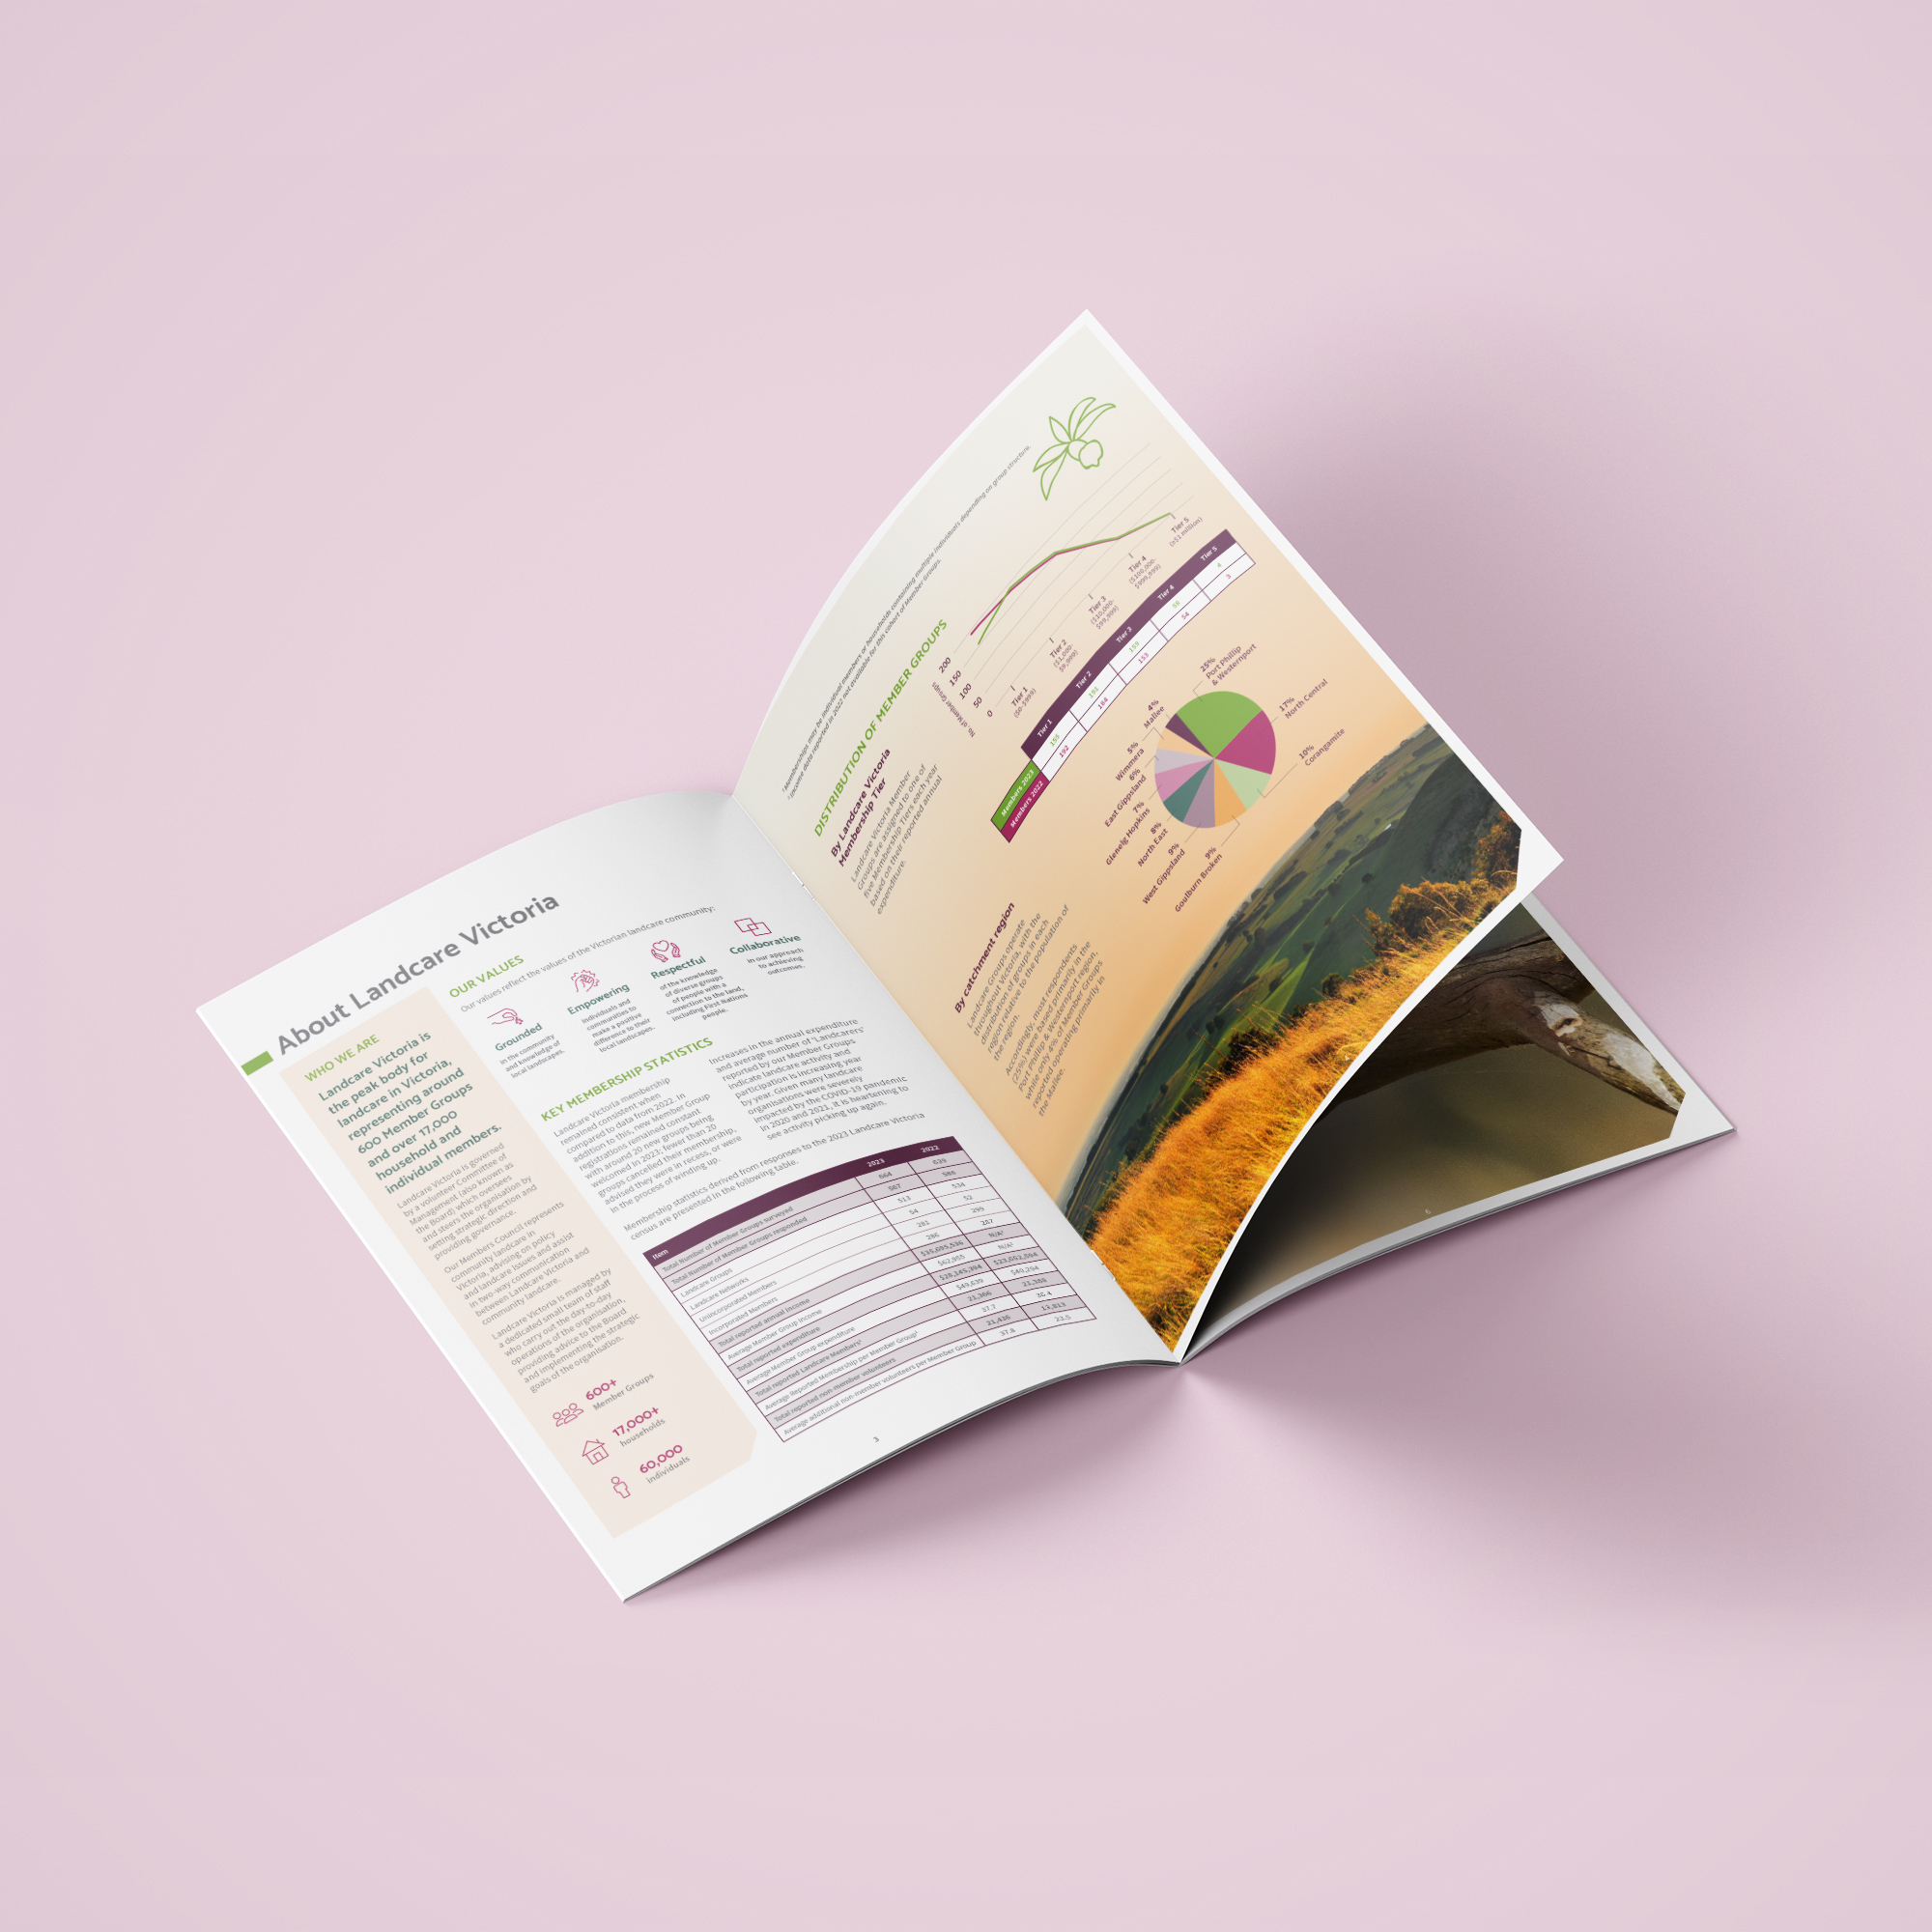 Full colour mockup of an open spread from the 2024 Annual Report for Landcare Victoria, featuring the 'About Landcare Victoria' section on the left page and financial summary tables and a detailed infographic on the right page, on a light pink background.